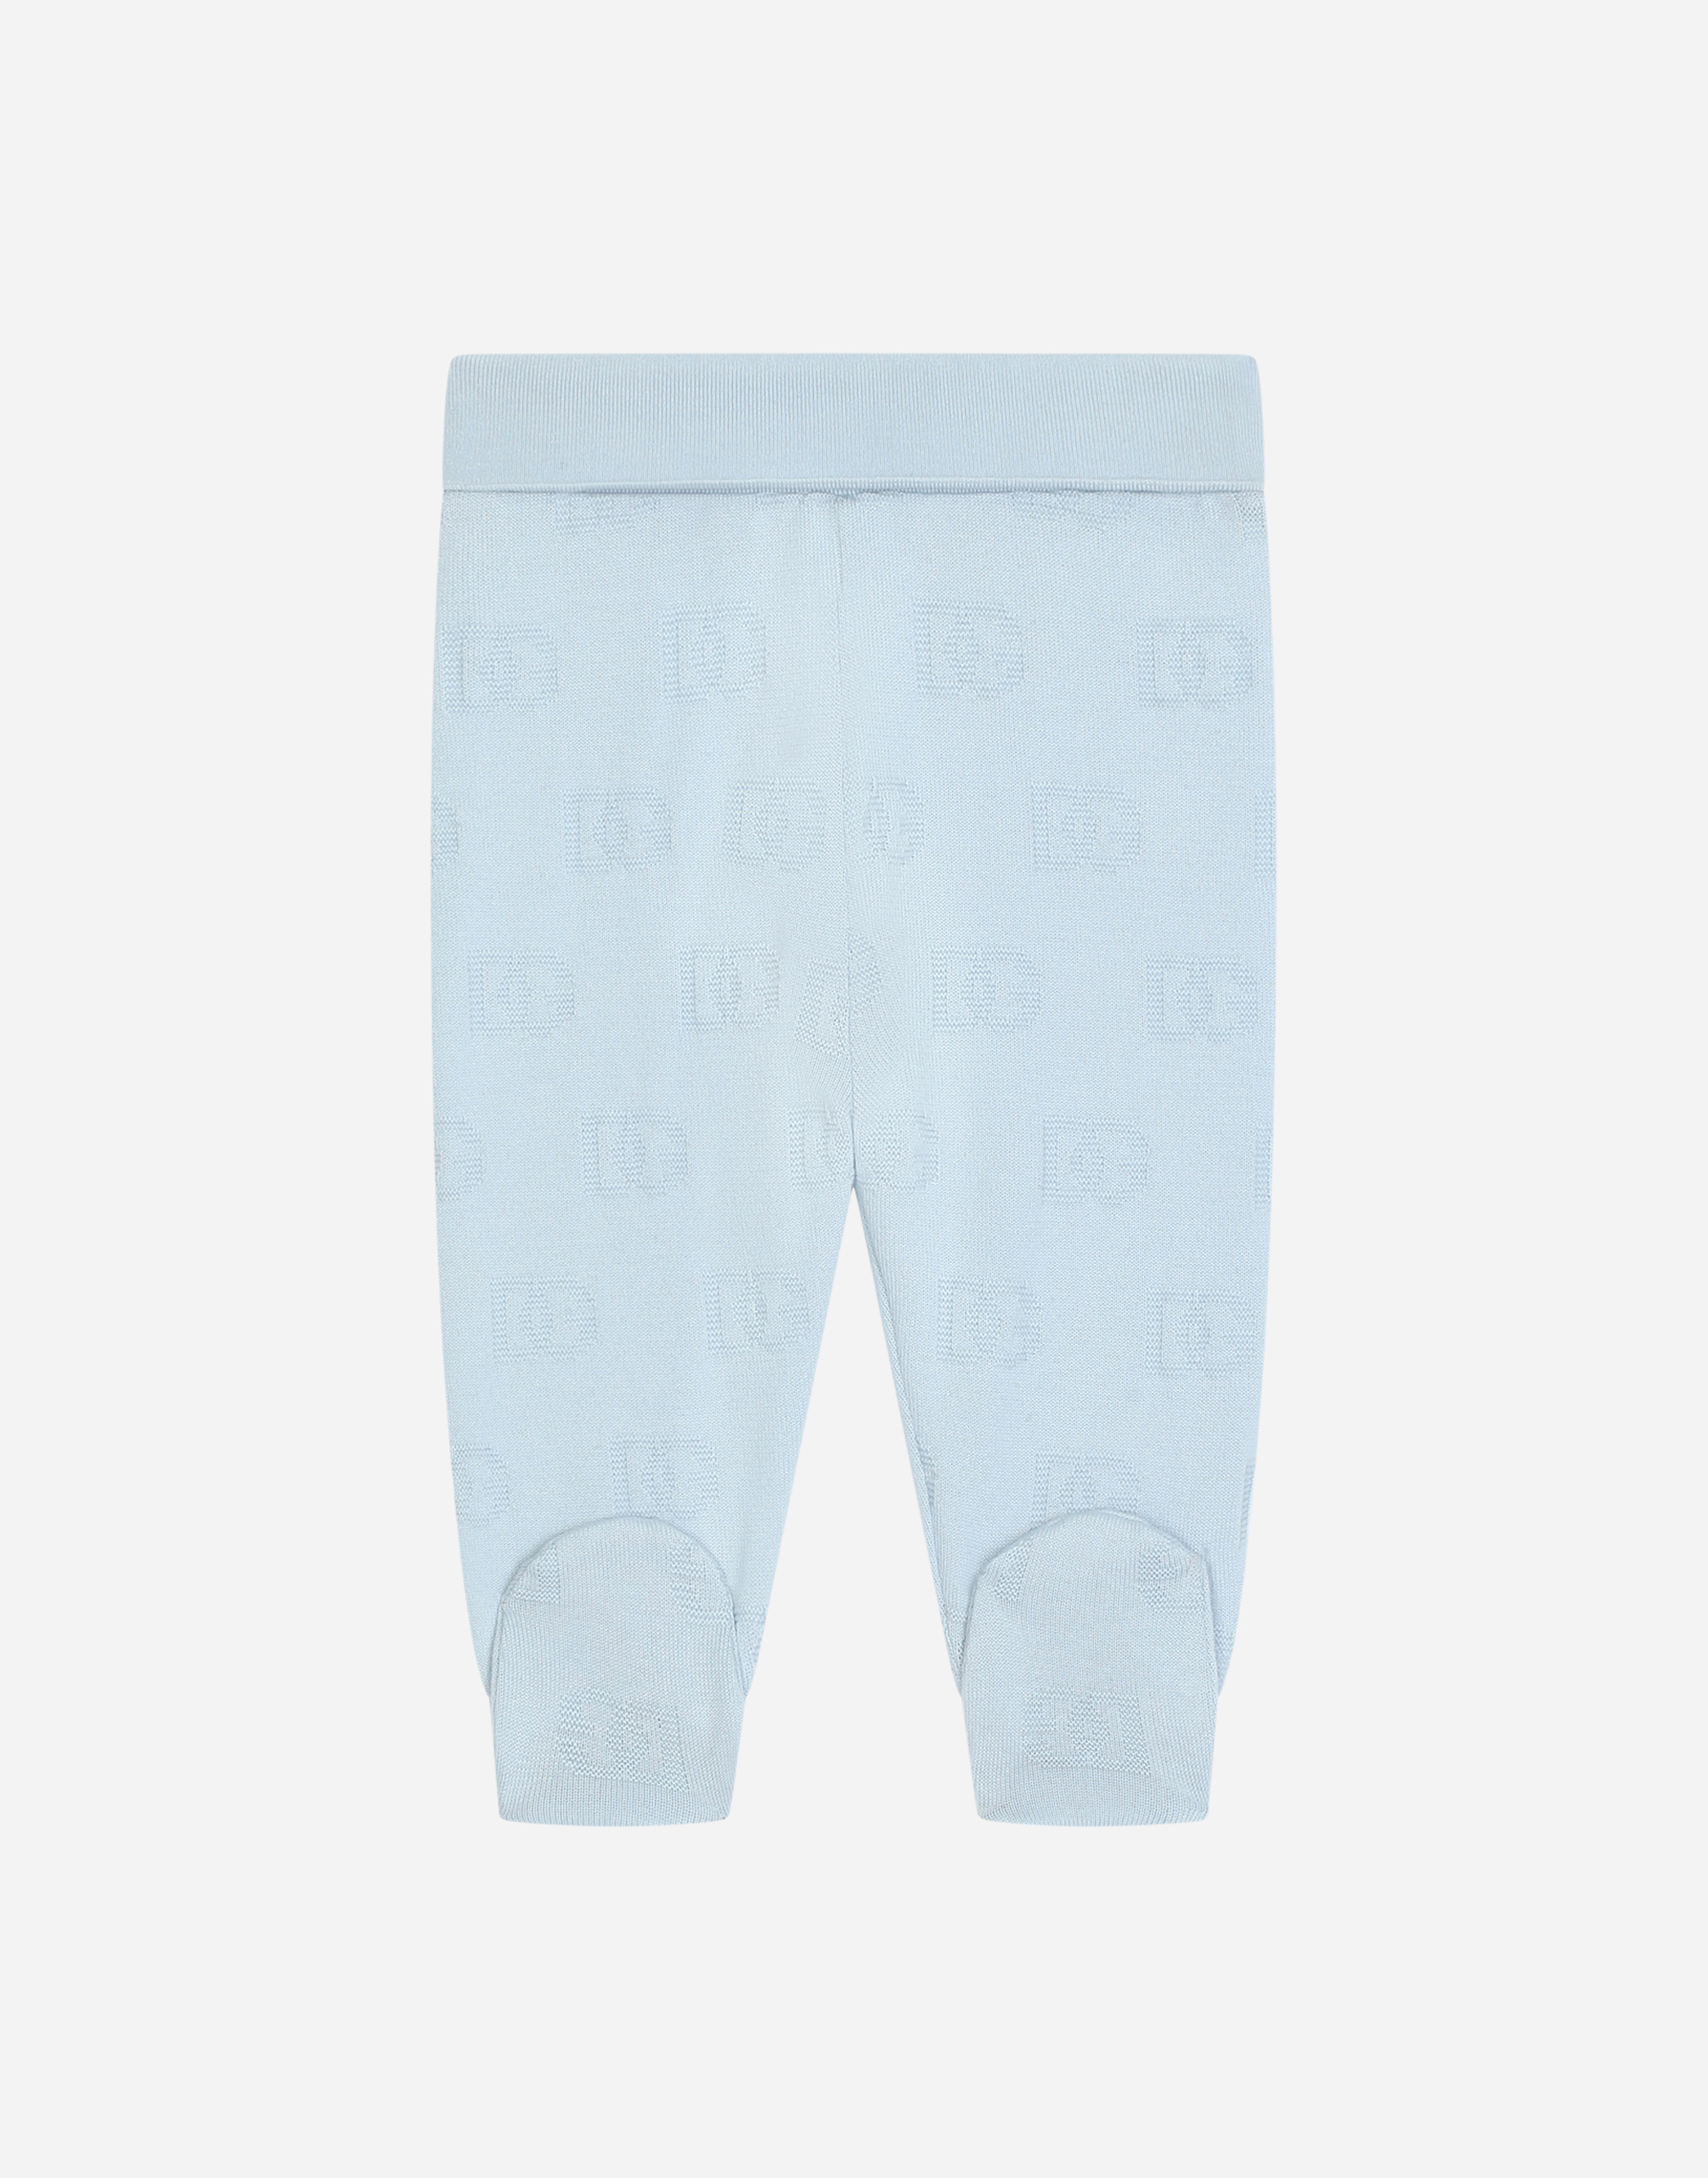 Jersey pants with jacquard DG logo in Grey